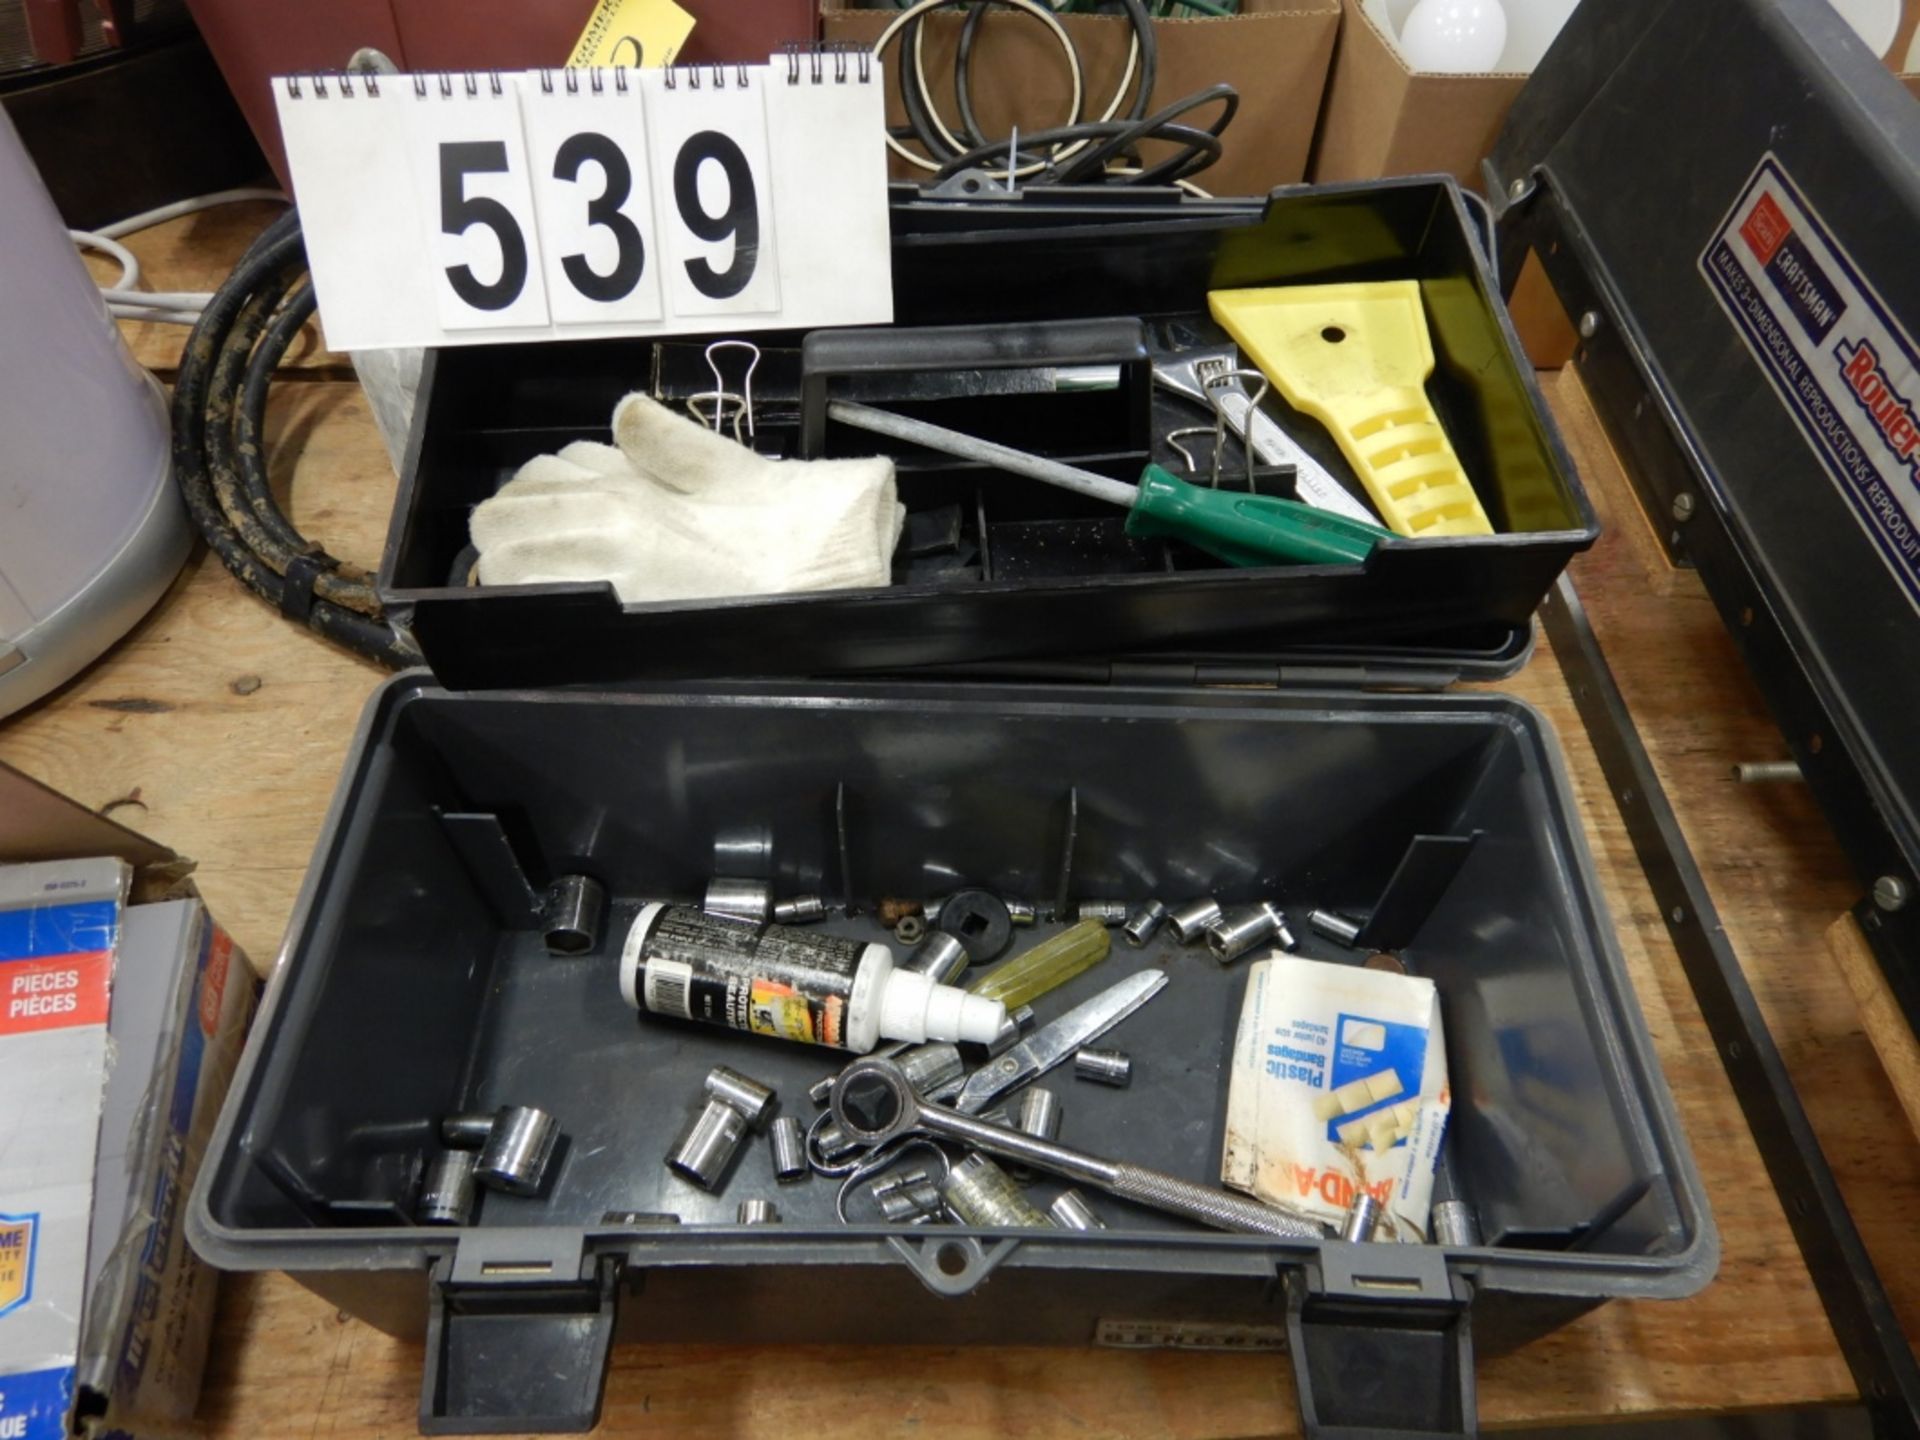 60 PC SAE/METRIC COMBINATION WRENCH SET, POLY TOOL BOX W/ASSORTED TOOLS - Image 2 of 4